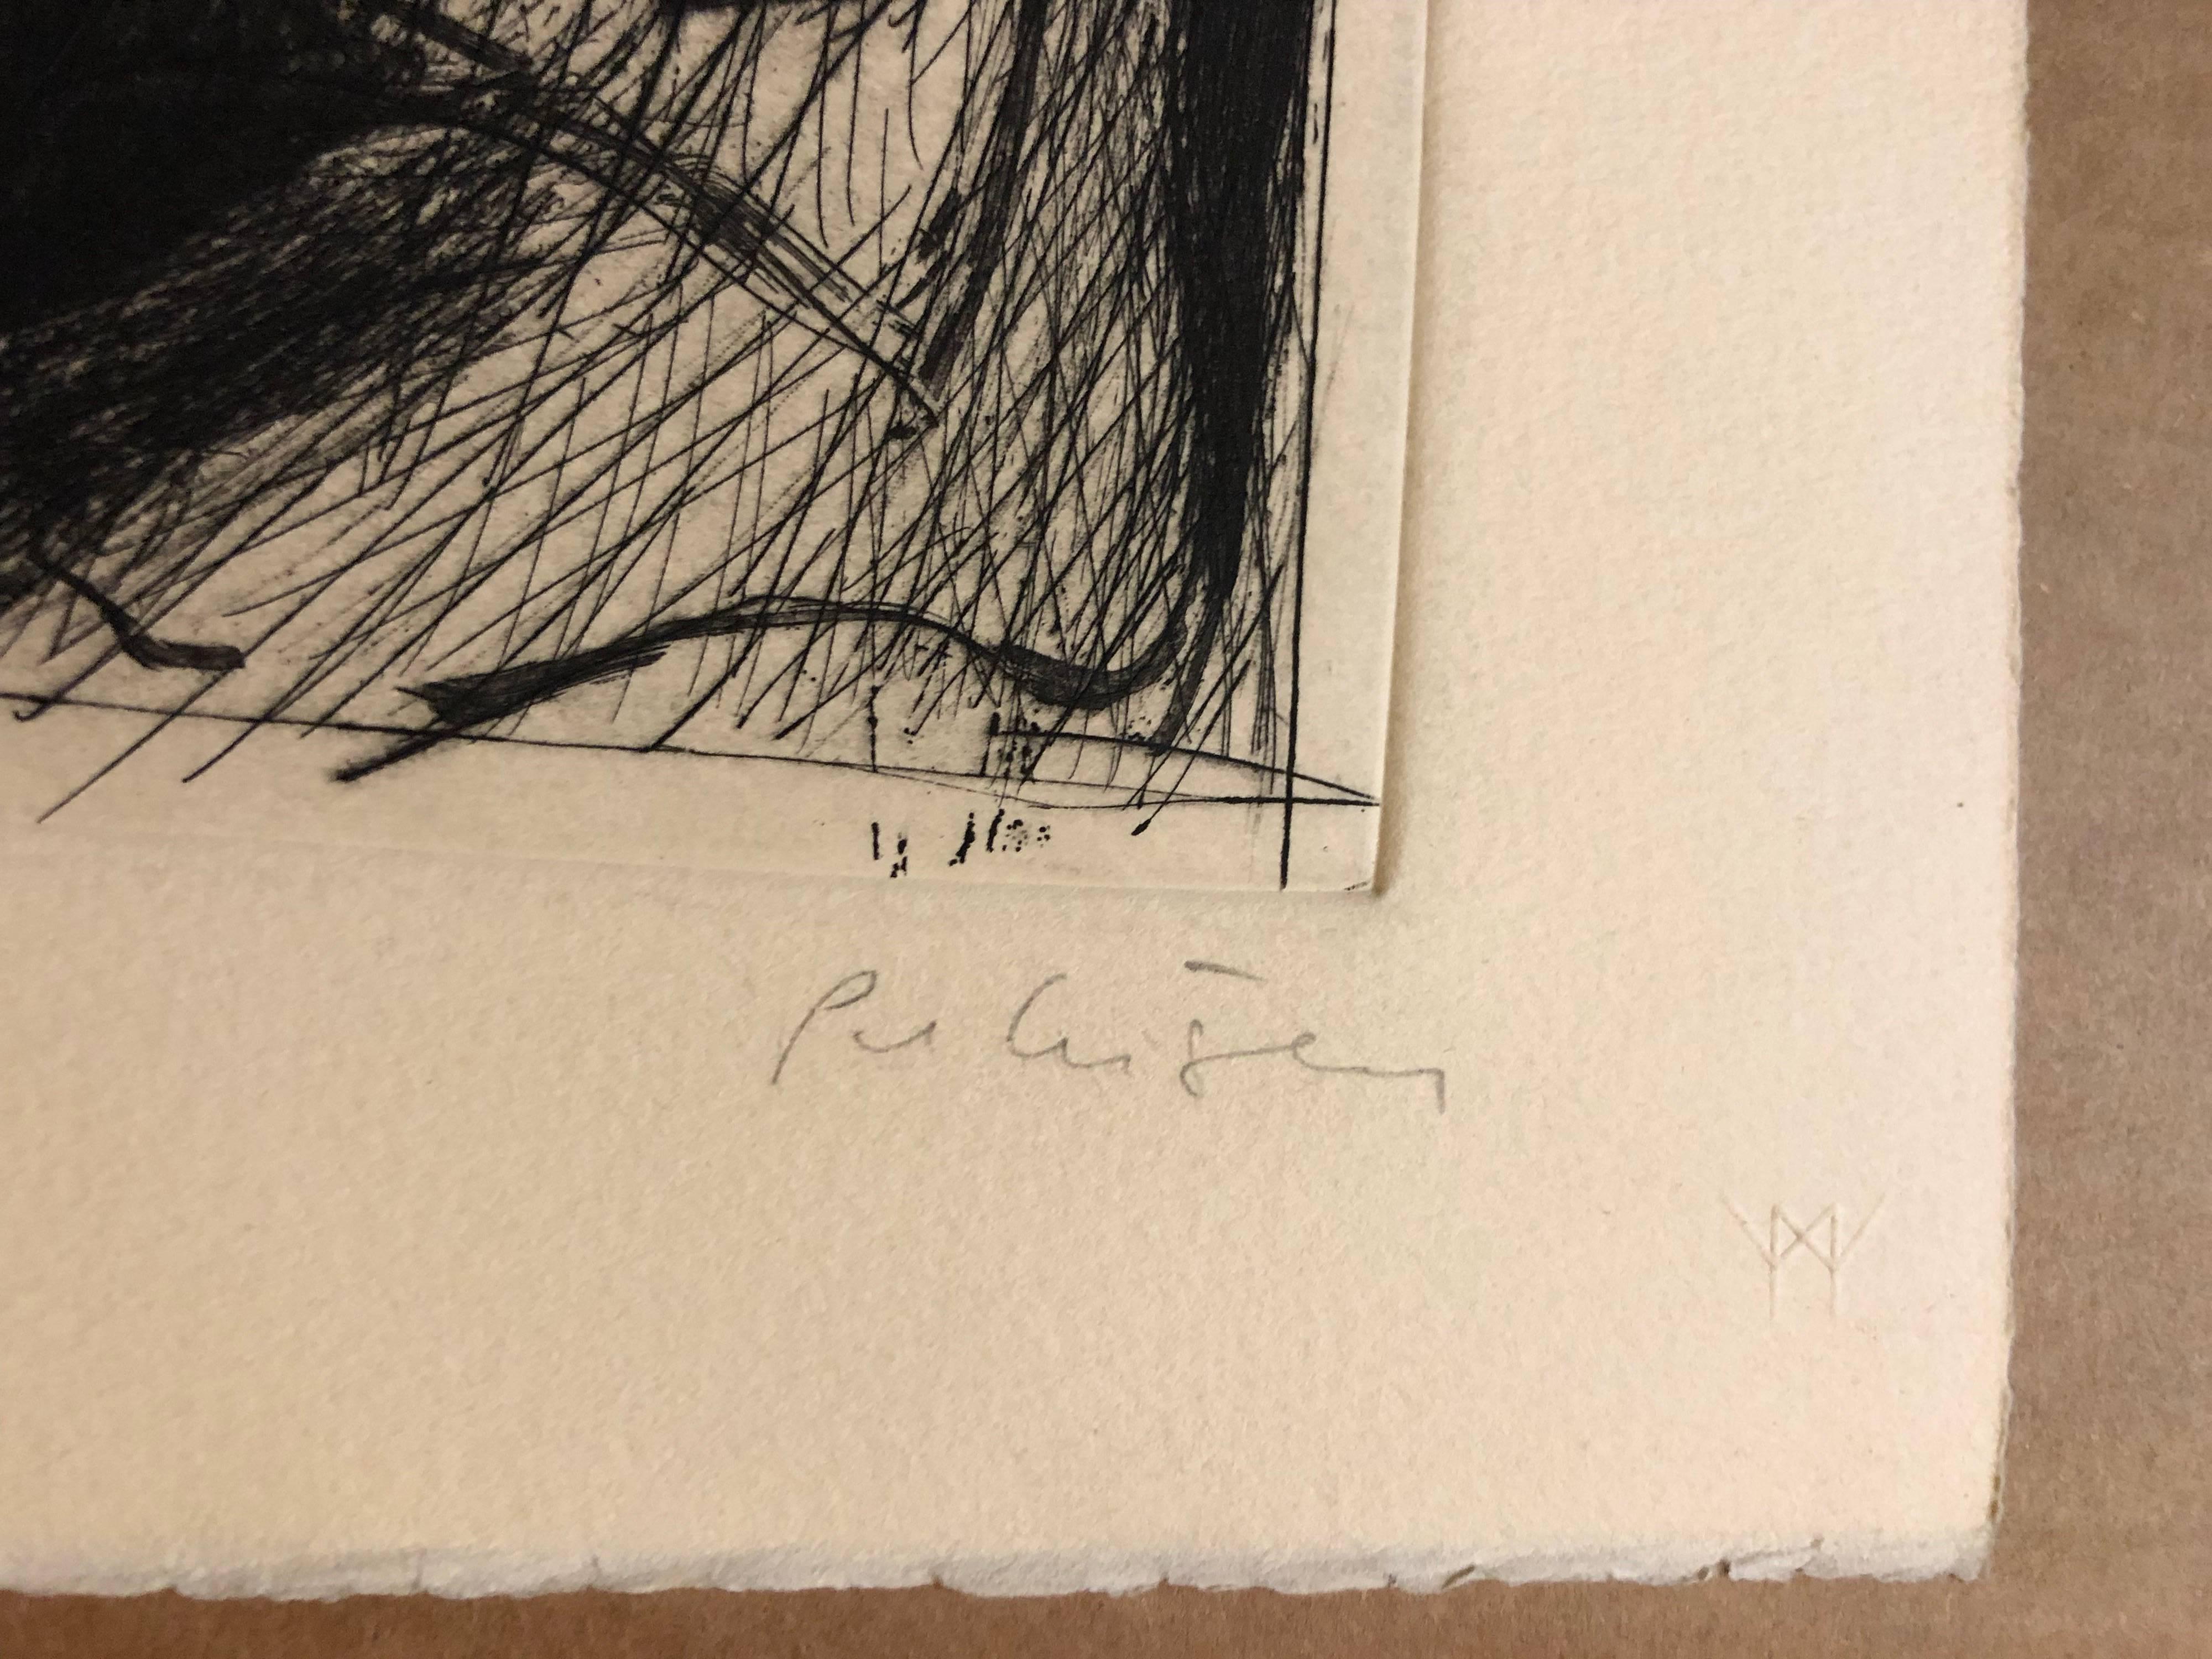 Will Petersen, a painter, master printer and a poet, was born in
Chicago. (Amer. 1928-1994) created this limited edition Etching on Arches paper at
the Lakeside Studio.

The LITHOGRAPH PRINT is from a limited edition of 25 (Roman Numerals),
printed